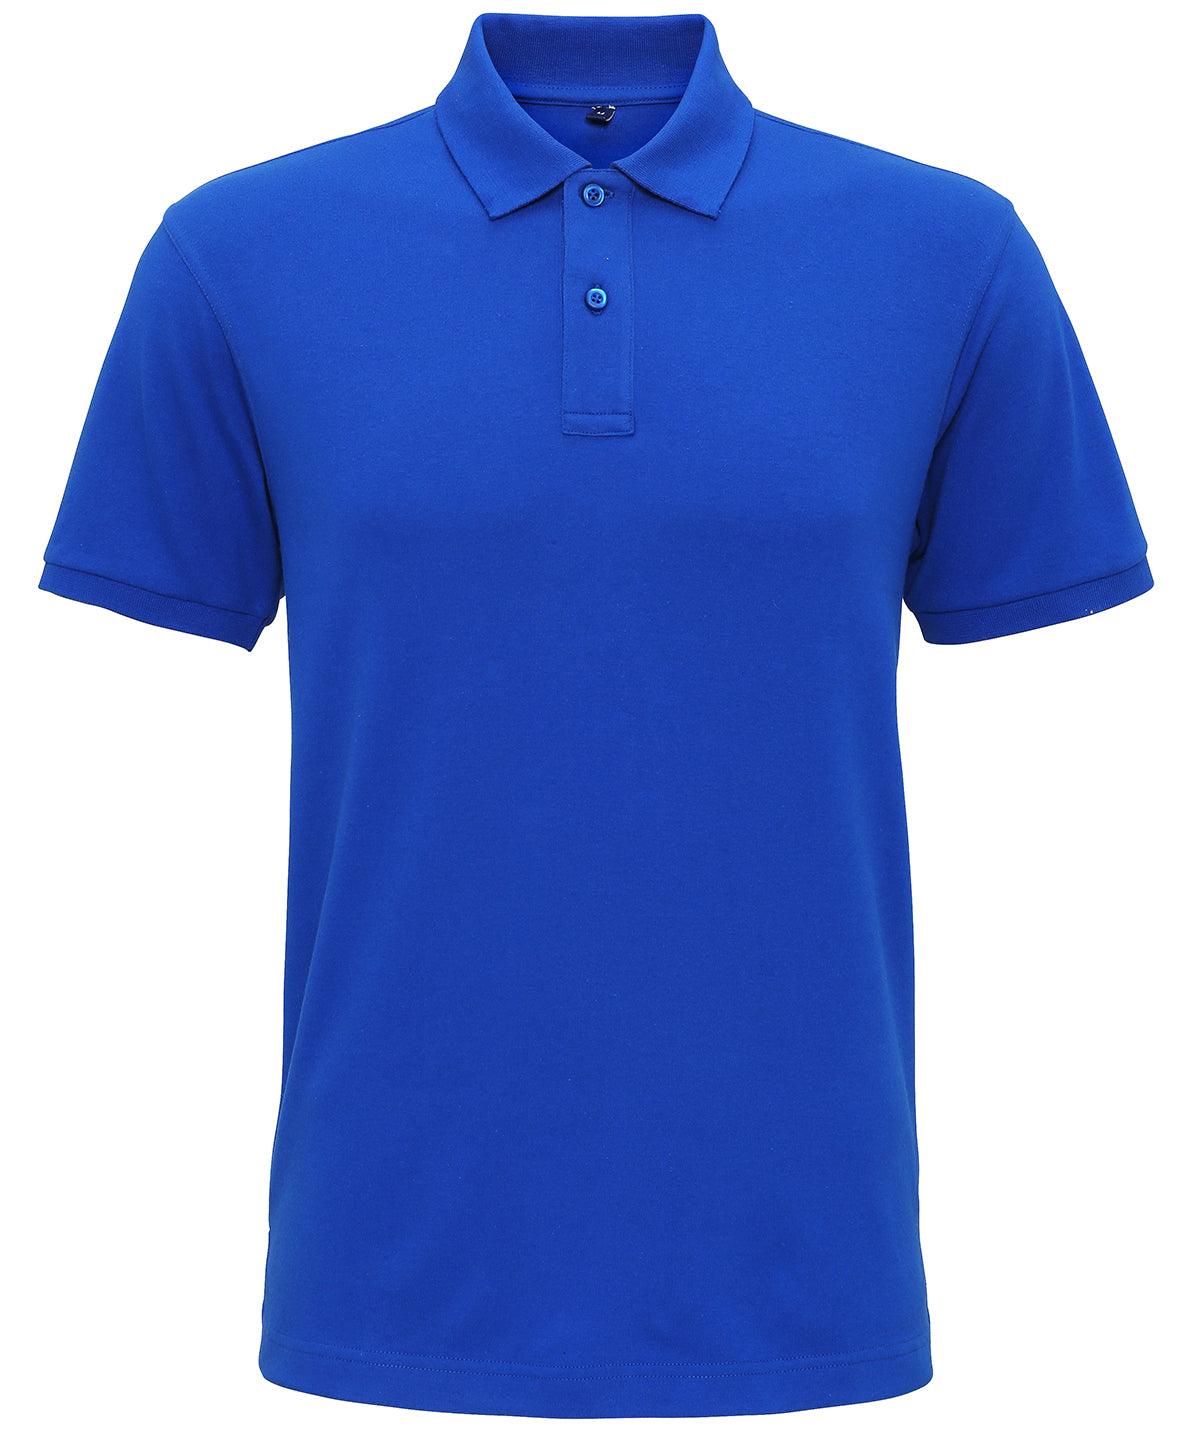 Bright Royal - Men's super smooth knit polo Polos Asquith & Fox Must Haves, Perfect for DTG print, Plus Sizes, Polos & Casual, Raladeal - Recently Added Schoolwear Centres